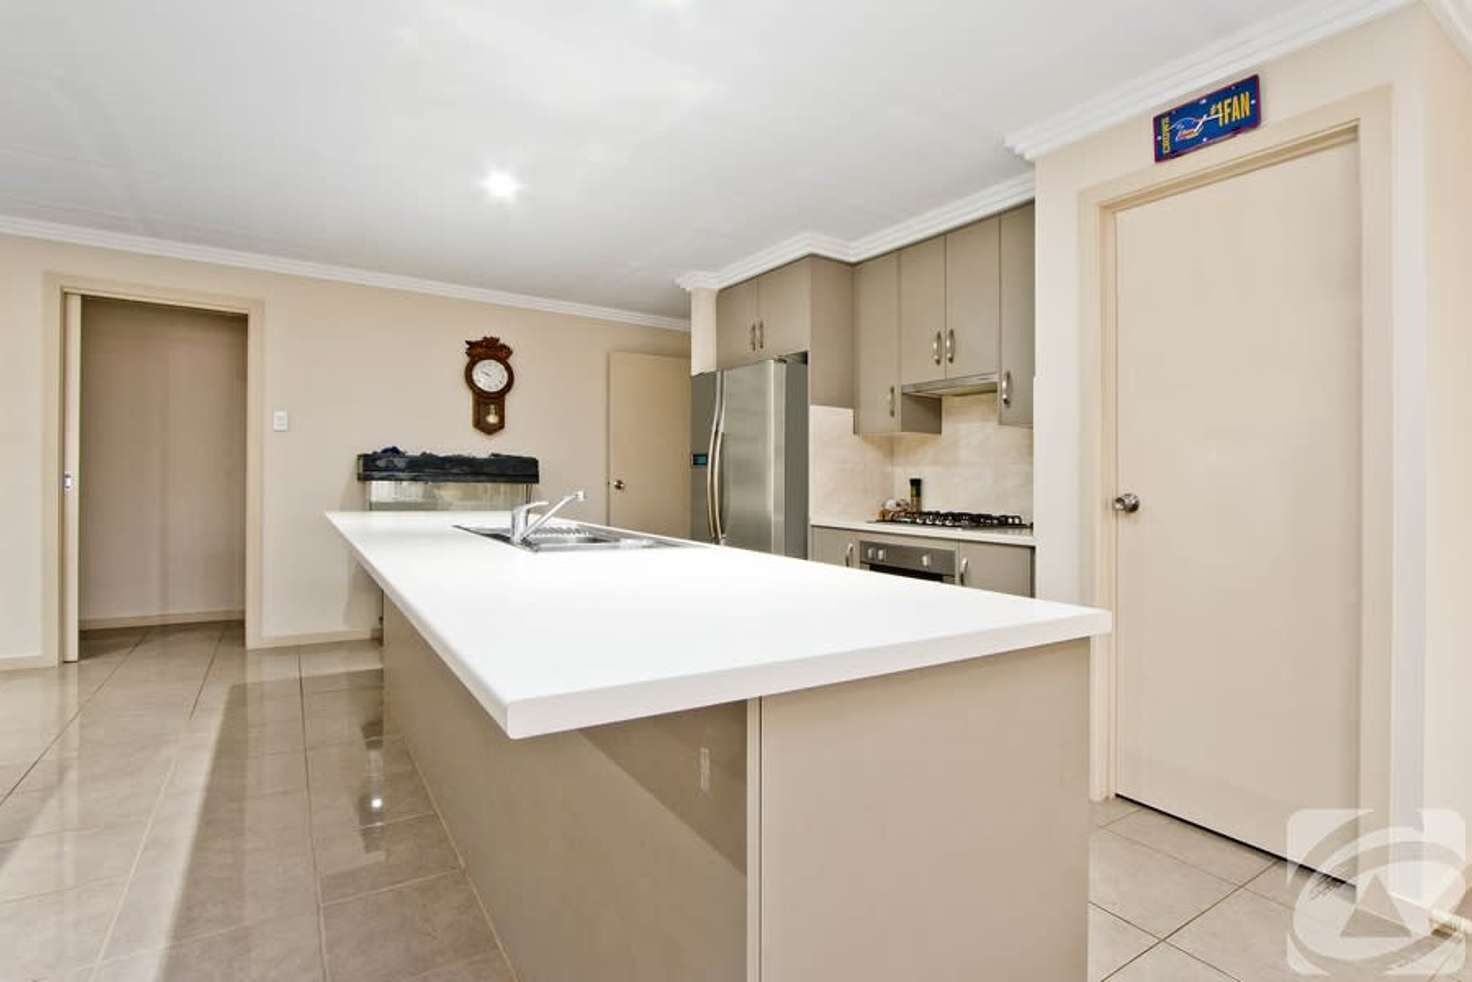 Main view of Homely house listing, 7 Chignell Circuit, Reid SA 5118